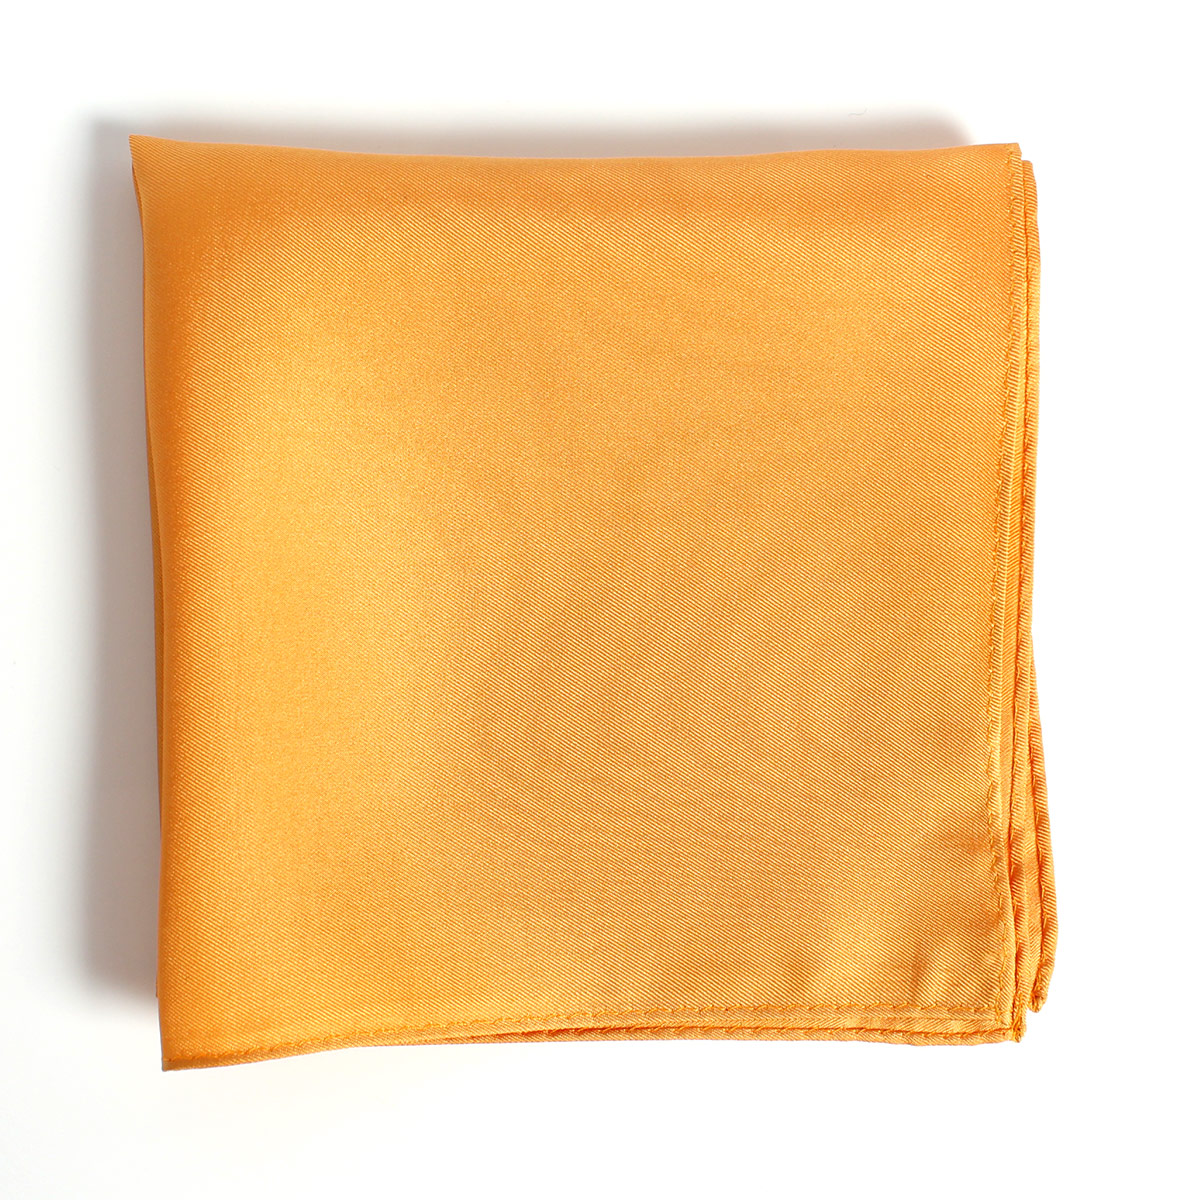 CF-1127 Made In Japan Twill 16 Momme Silk Pocket Square Orange[Formal Accessories] Yamamoto(EXCY)